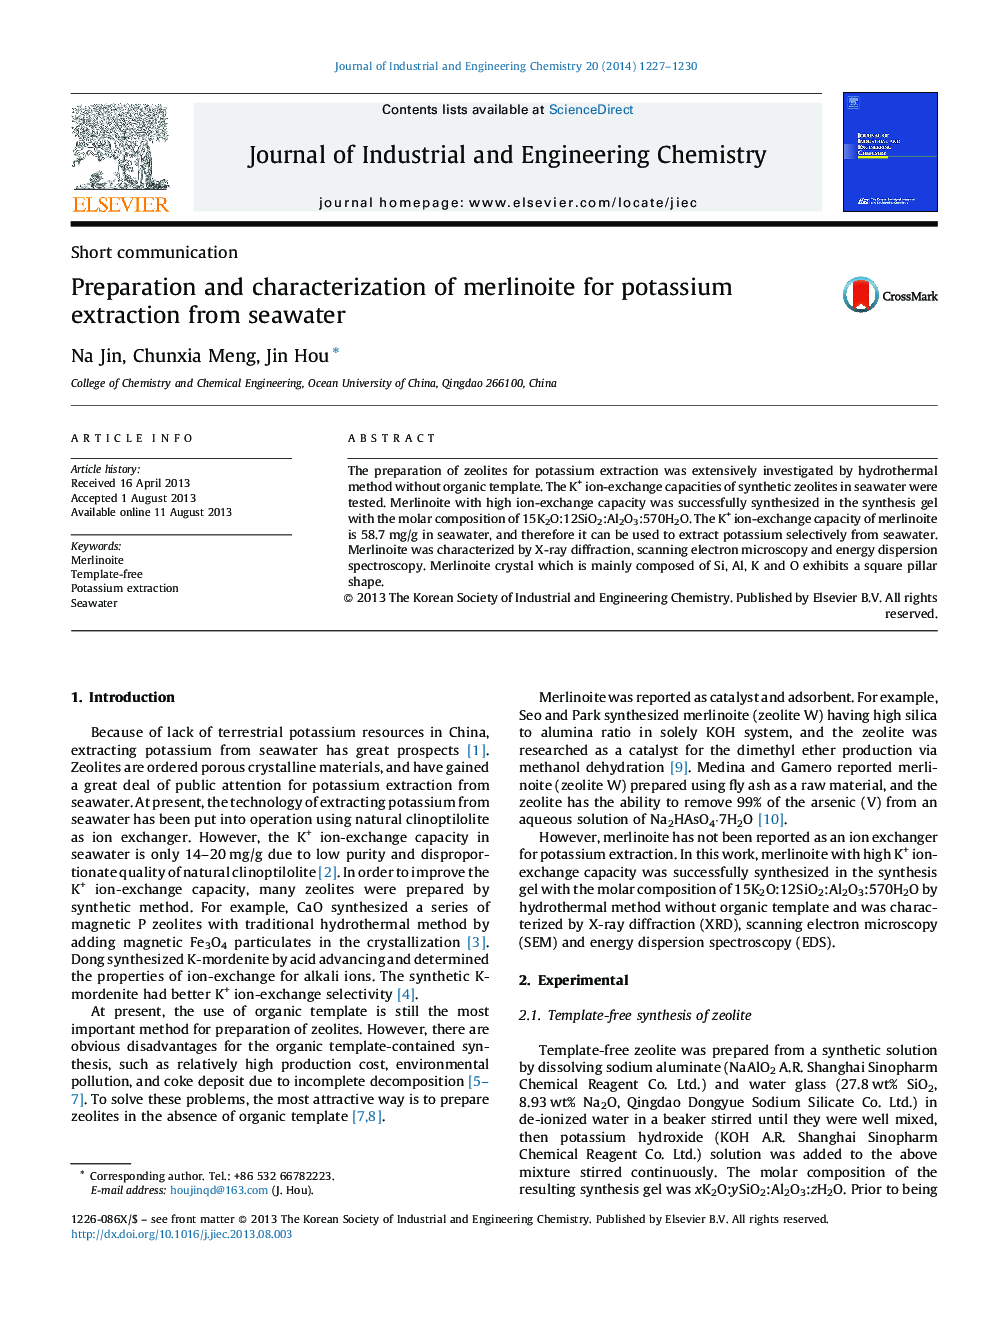 Preparation and characterization of merlinoite for potassium extraction from seawater